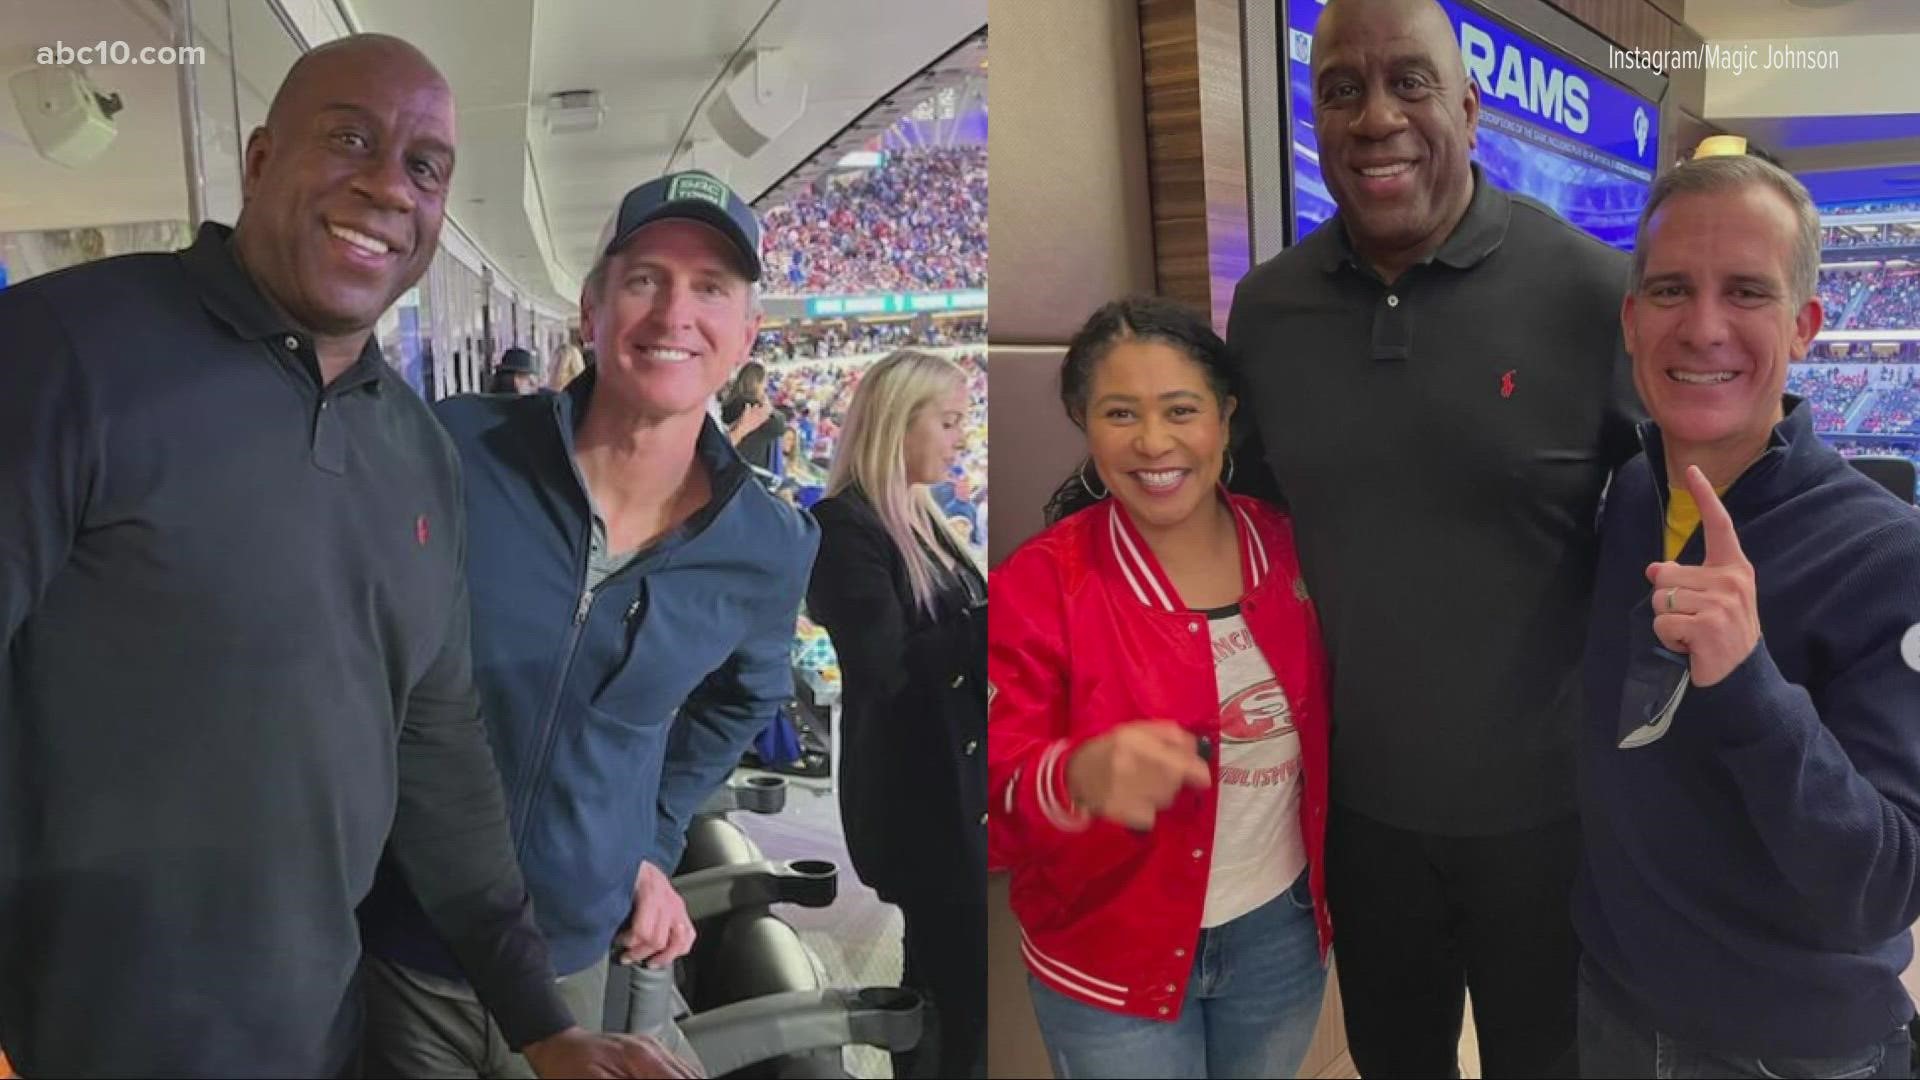 A photo posted by Magic Johnson on Instagram shows Newsom maskless in a stadium with a 70,000 person capacity.